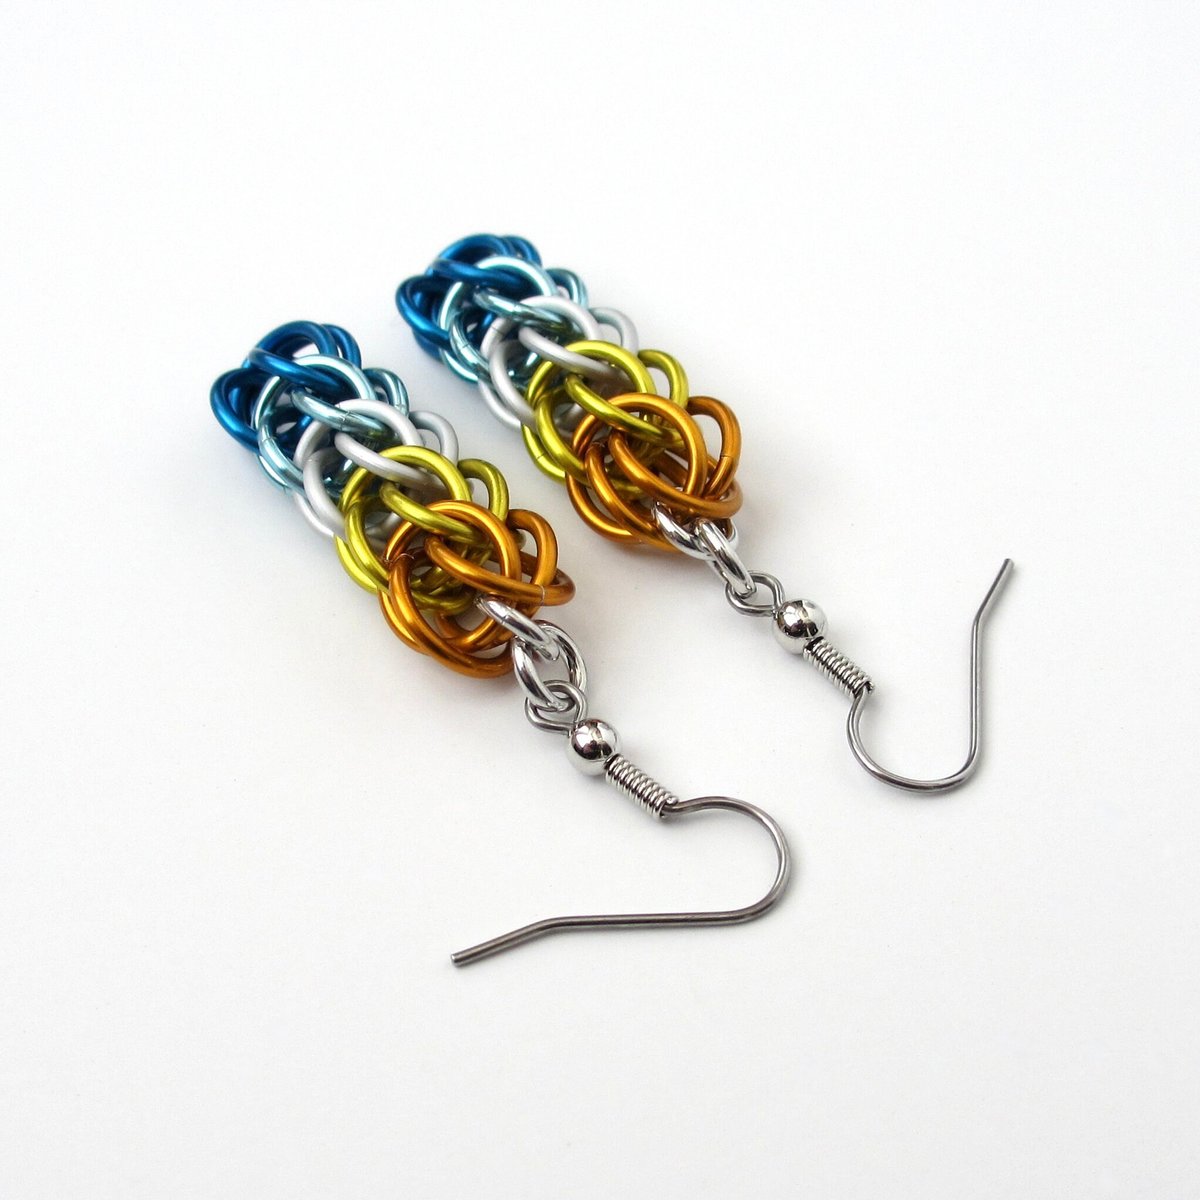 Aroace pride earrings, chainmail full Persian weave, lightweight anodized aluminum LGBTQIA jewelry